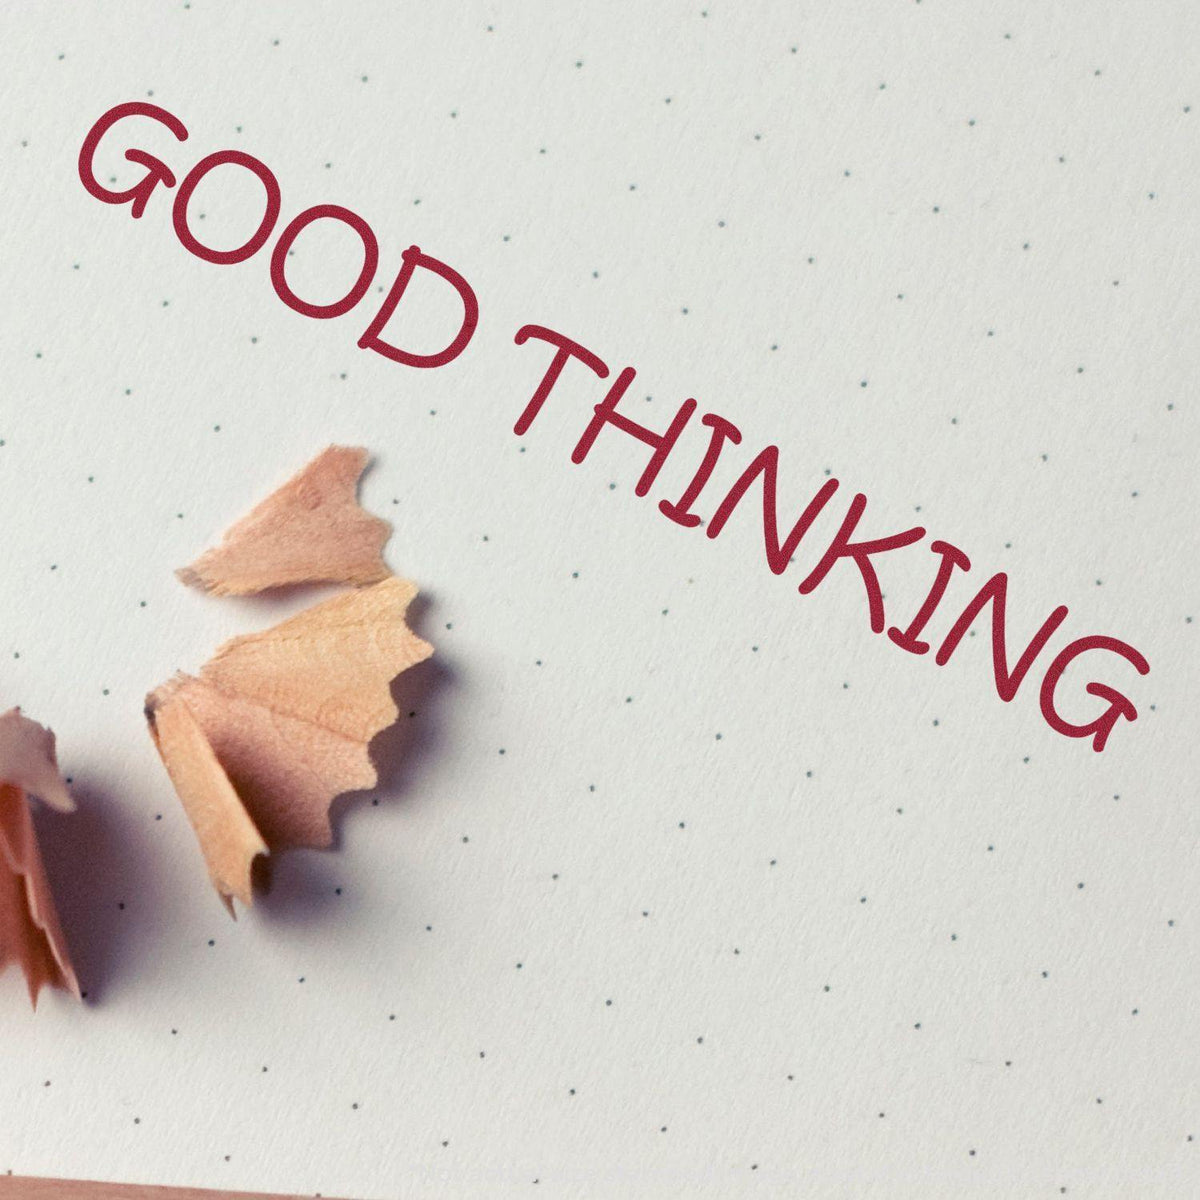 In Use Good Thinking Rubber Stamp Image